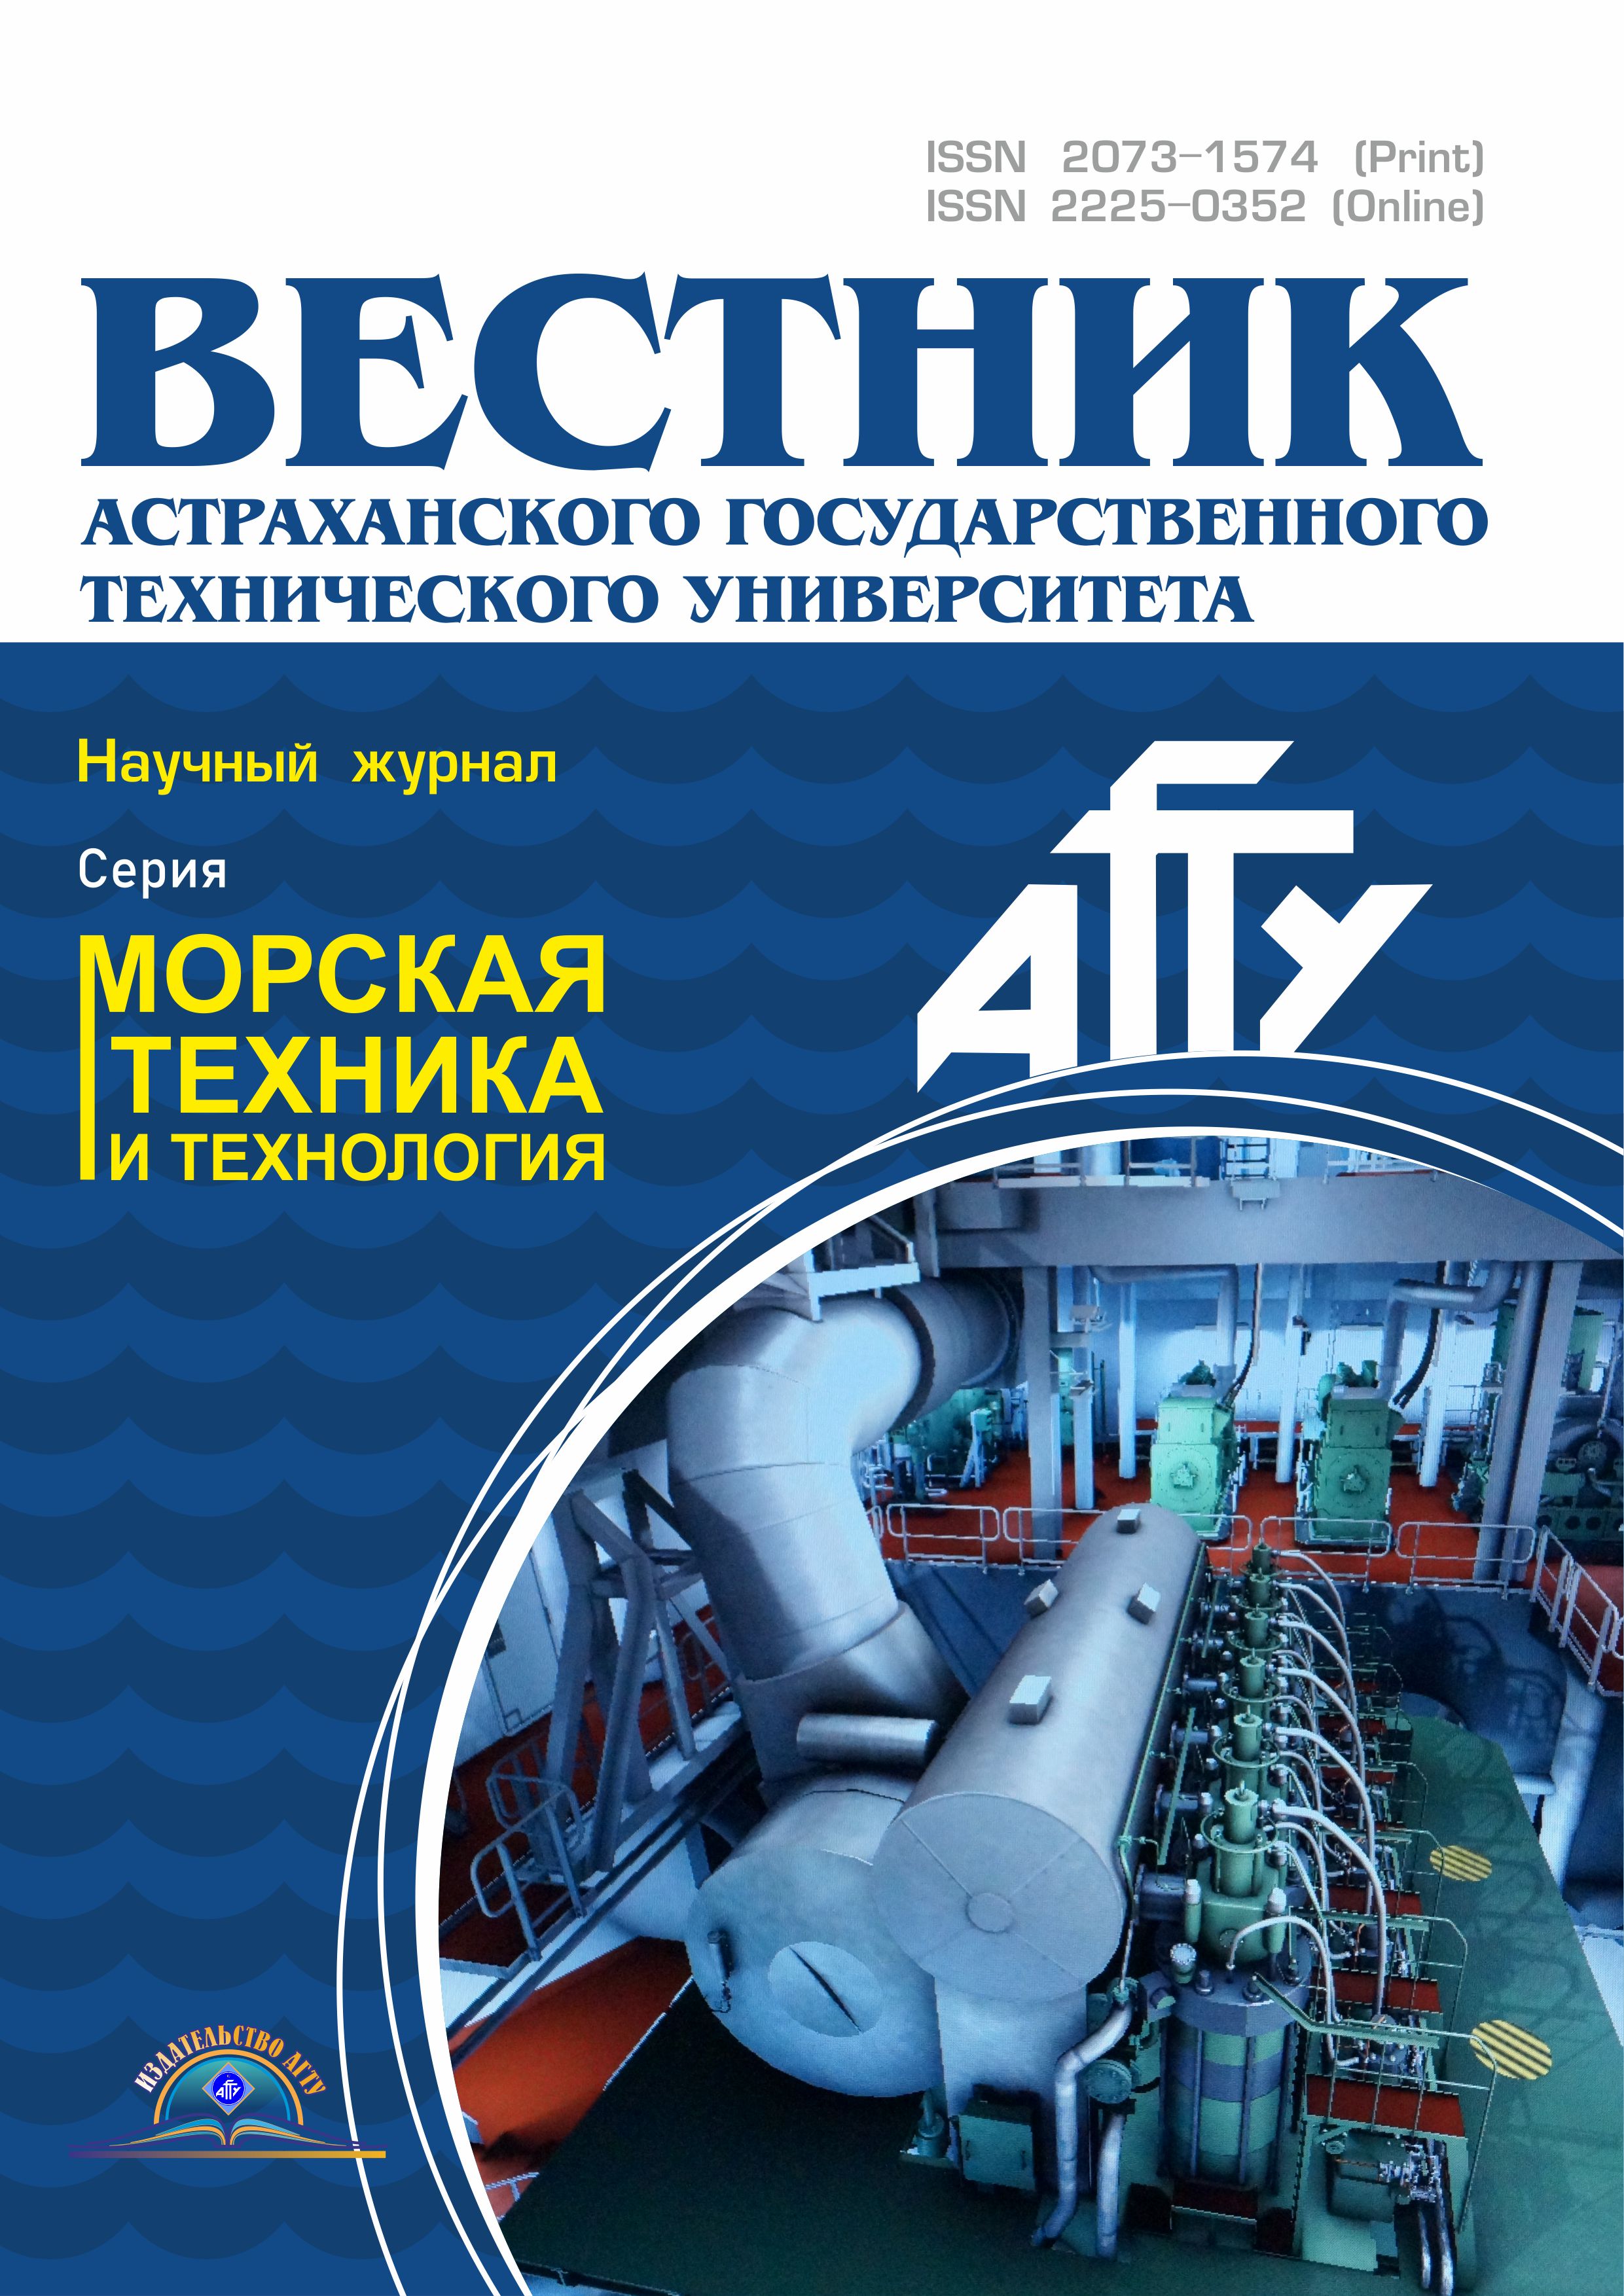                         RESEARCH OF PROPERTIES OF THE FREQUENCY CONVERTER AS THE POWER SUPPLY OF THE SHIP ELECTRIC EQUIPMENT
            